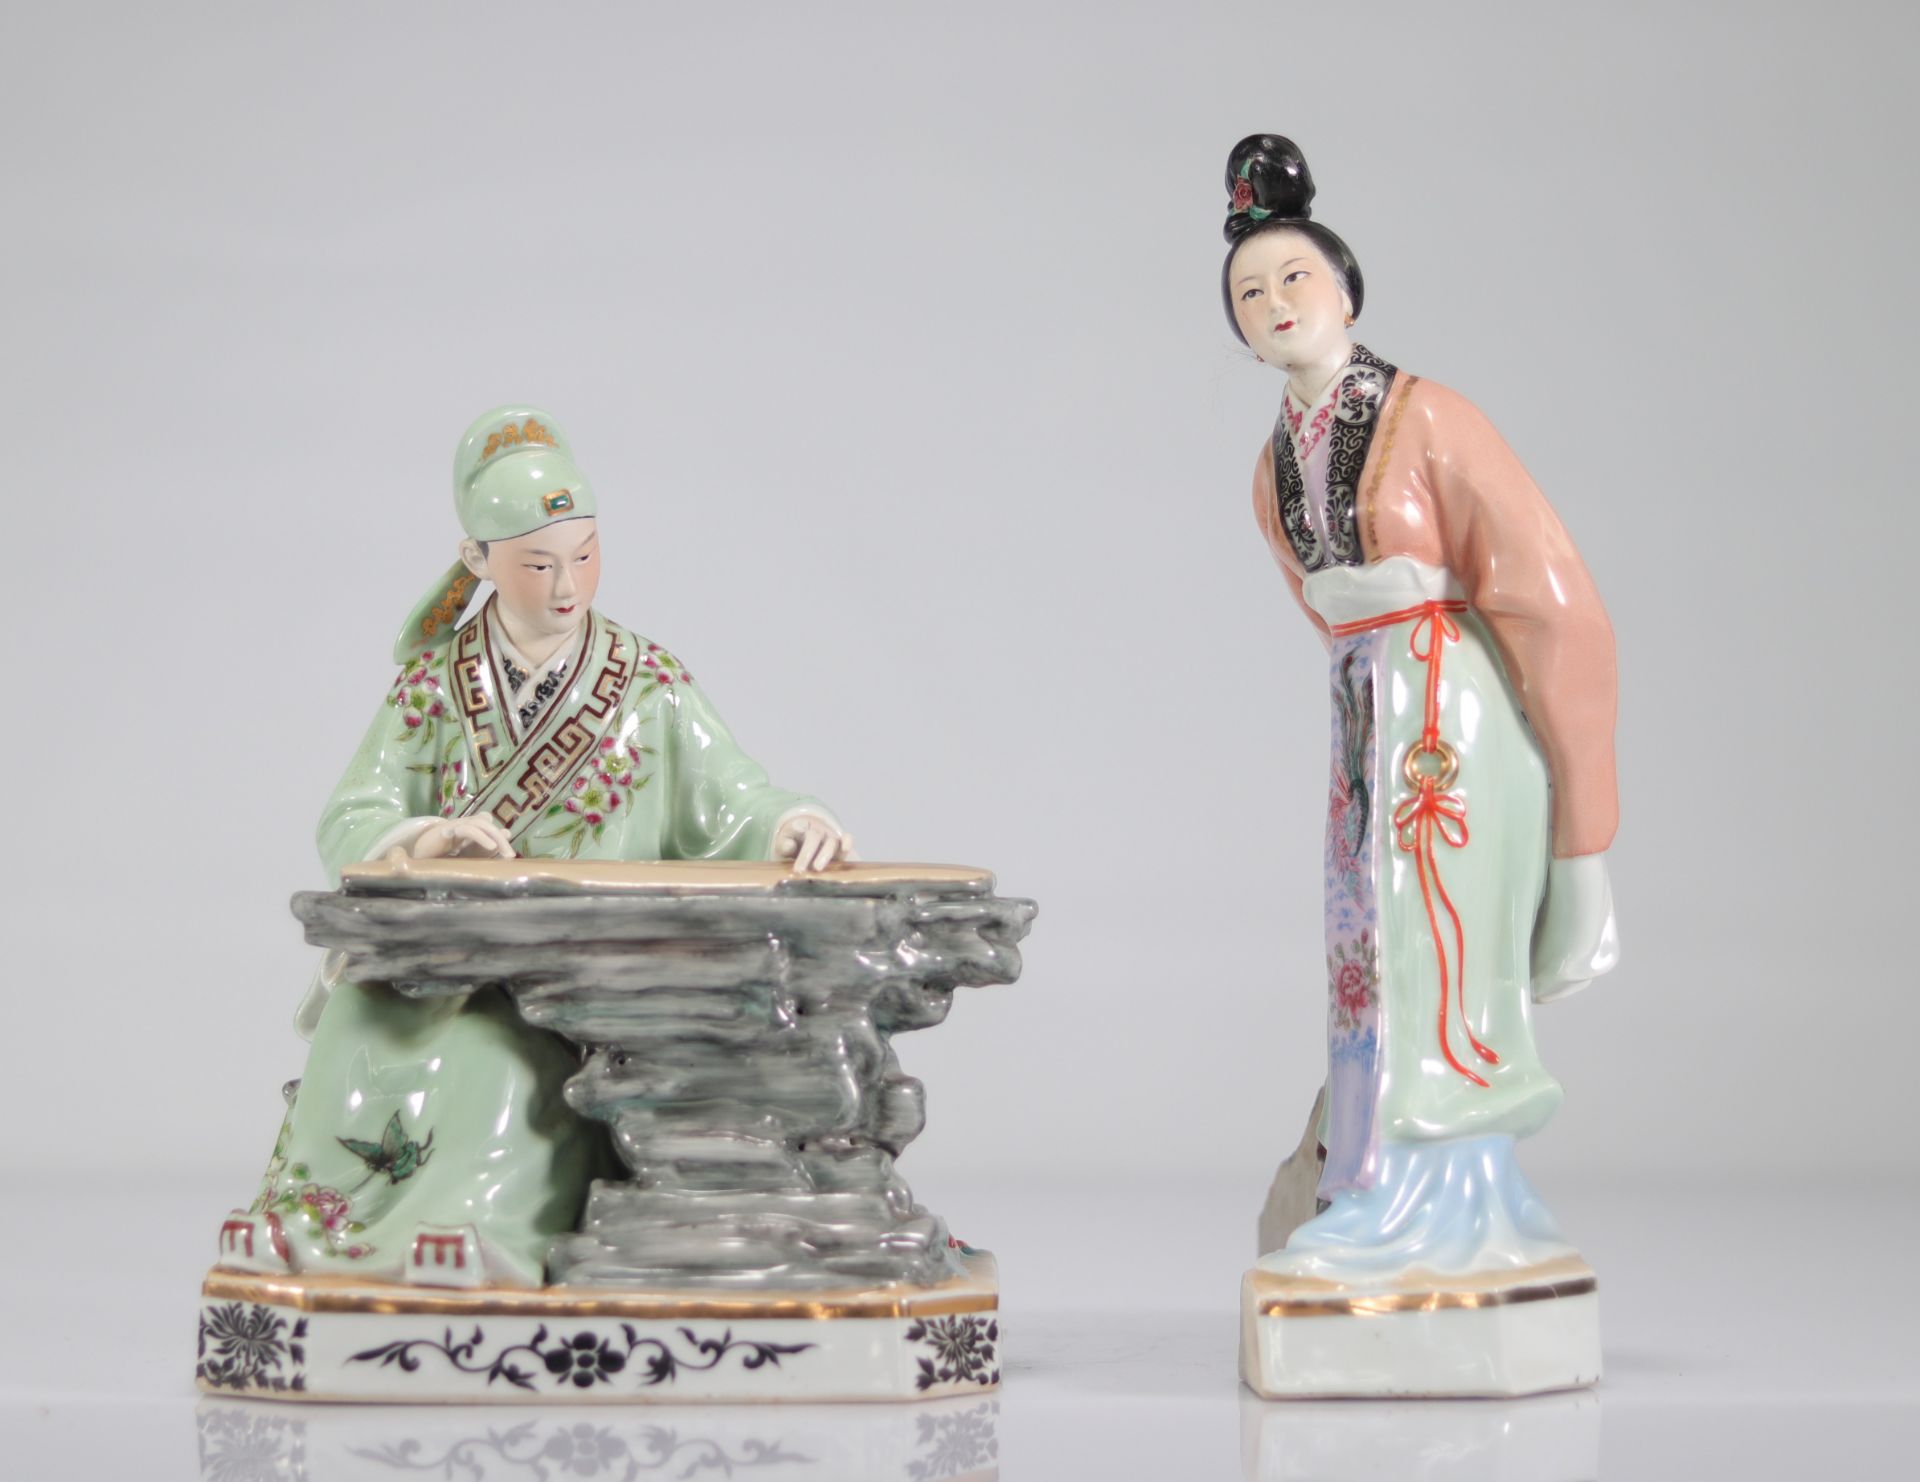 China porcelain in two parts - Image 2 of 3